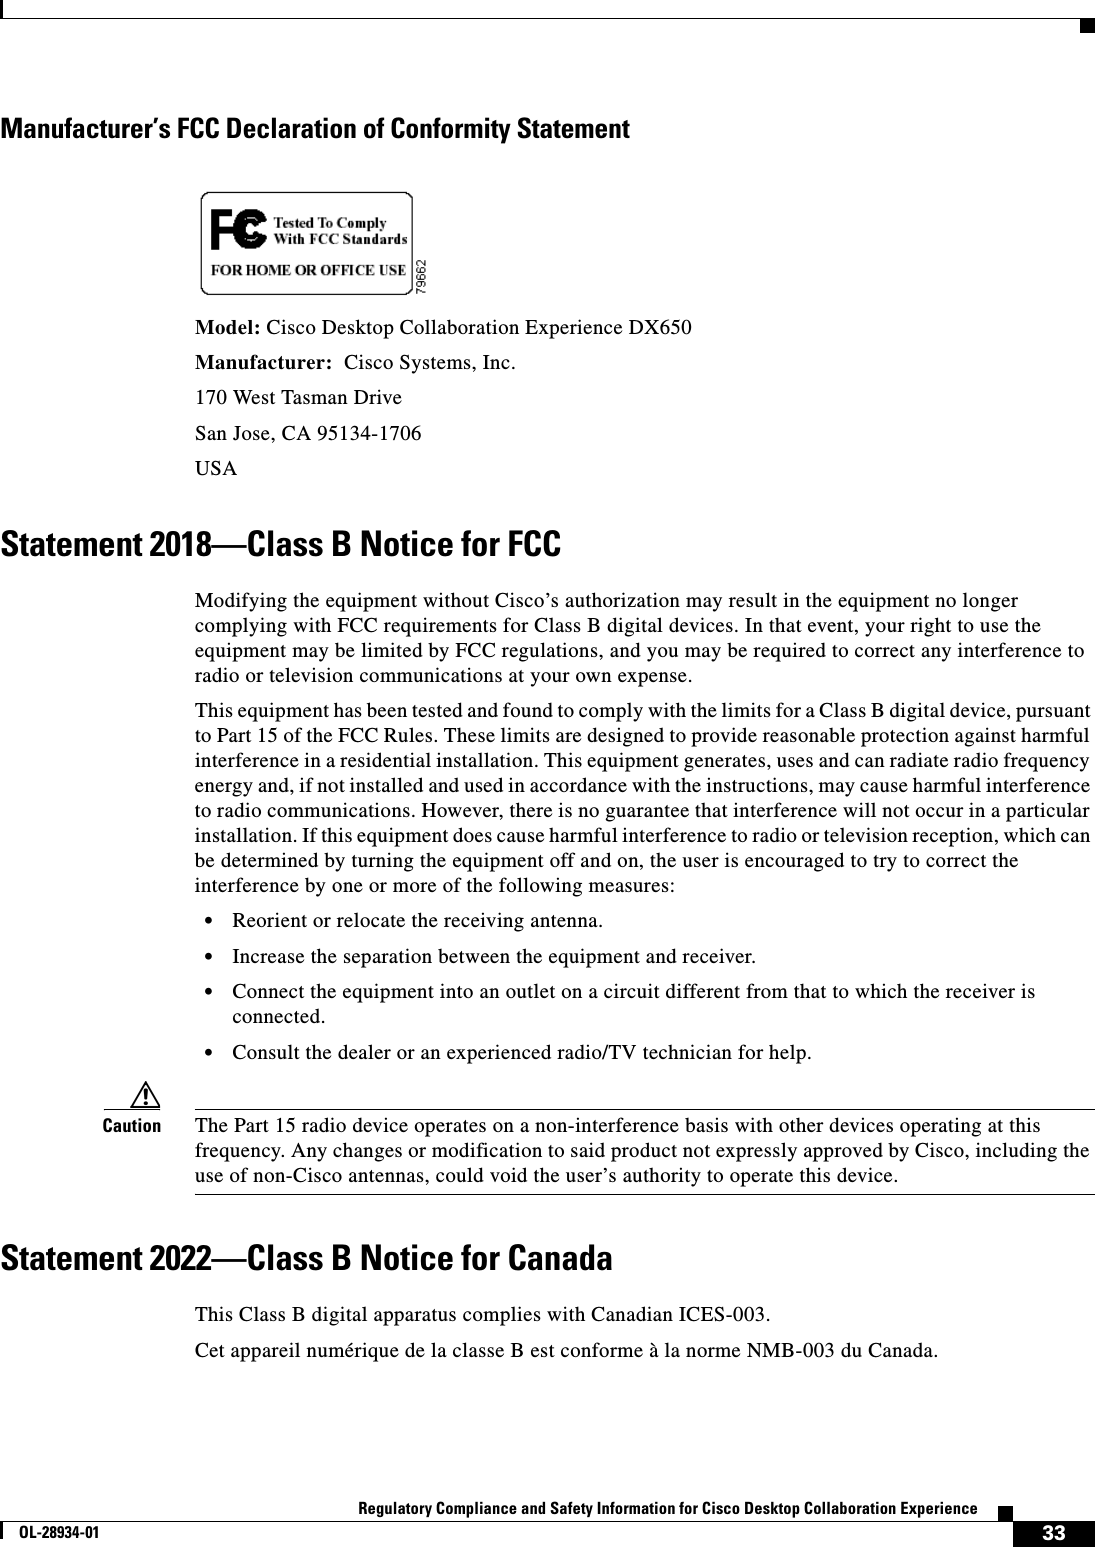  33Regulatory Compliance and Safety Information for Cisco Desktop Collaboration ExperienceOL-28934-01Manufacturer’s FCC Declaration of Conformity StatementModel: Cisco Desktop Collaboration Experience DX650Manufacturer:  Cisco Systems, Inc.170 West Tasman DriveSan Jose, CA 95134-1706USAStatement 2018—Class B Notice for FCCModifying the equipment without Cisco’s authorization may result in the equipment no longer complying with FCC requirements for Class B digital devices. In that event, your right to use the equipment may be limited by FCC regulations, and you may be required to correct any interference to radio or television communications at your own expense.This equipment has been tested and found to comply with the limits for a Class B digital device, pursuant to Part 15 of the FCC Rules. These limits are designed to provide reasonable protection against harmful interference in a residential installation. This equipment generates, uses and can radiate radio frequency energy and, if not installed and used in accordance with the instructions, may cause harmful interference to radio communications. However, there is no guarantee that interference will not occur in a particular installation. If this equipment does cause harmful interference to radio or television reception, which can be determined by turning the equipment off and on, the user is encouraged to try to correct the interference by one or more of the following measures:•Reorient or relocate the receiving antenna.•Increase the separation between the equipment and receiver.•Connect the equipment into an outlet on a circuit different from that to which the receiver is connected.•Consult the dealer or an experienced radio/TV technician for help.Caution The Part 15 radio device operates on a non-interference basis with other devices operating at this frequency. Any changes or modification to said product not expressly approved by Cisco, including the use of non-Cisco antennas, could void the user’s authority to operate this device.Statement 2022—Class B Notice for CanadaThis Class B digital apparatus complies with Canadian ICES-003.Cet appareil numérique de la classe B est conforme à la norme NMB-003 du Canada.